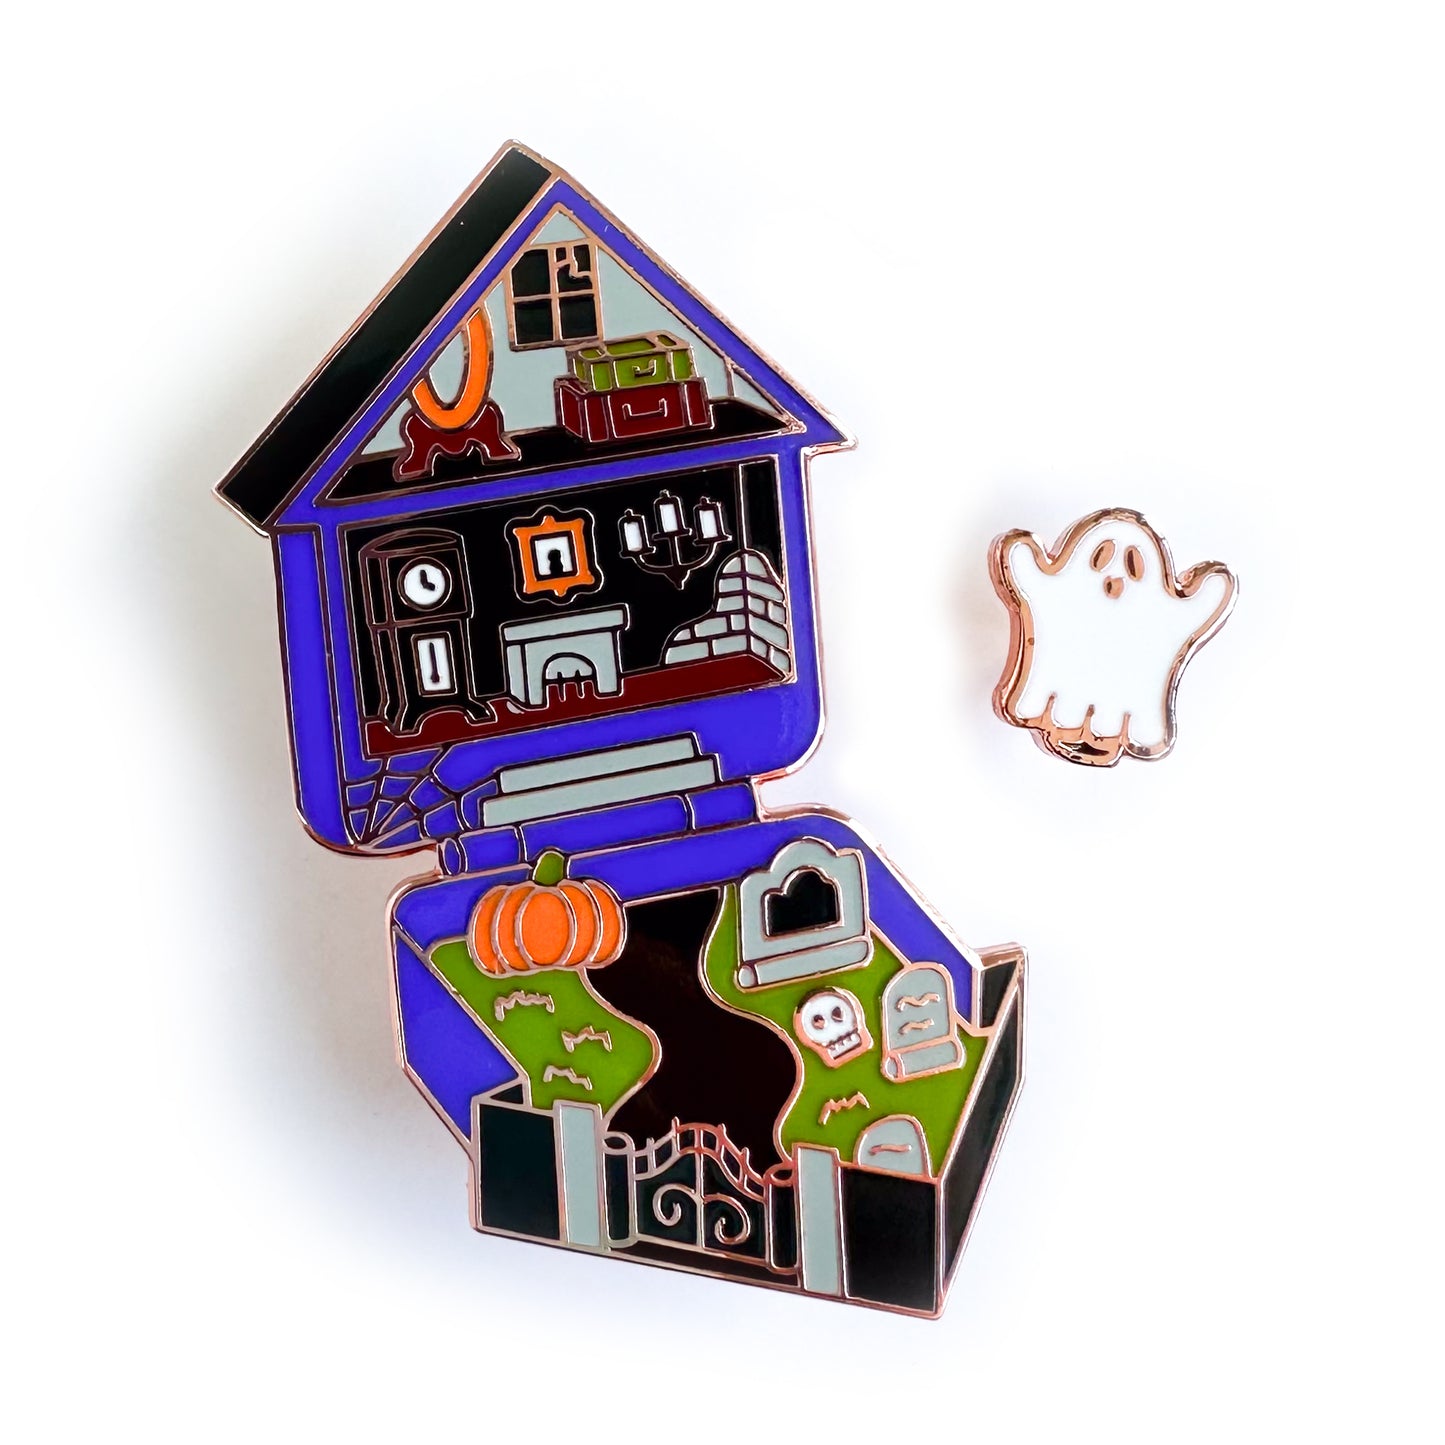 Two enamel pins, one shaped like a little sheet ghost, the other shaped like a Polly Pocket toy house but the house is haunted. It has little details like a broken window, candelabra, and gravestones in the yard.  